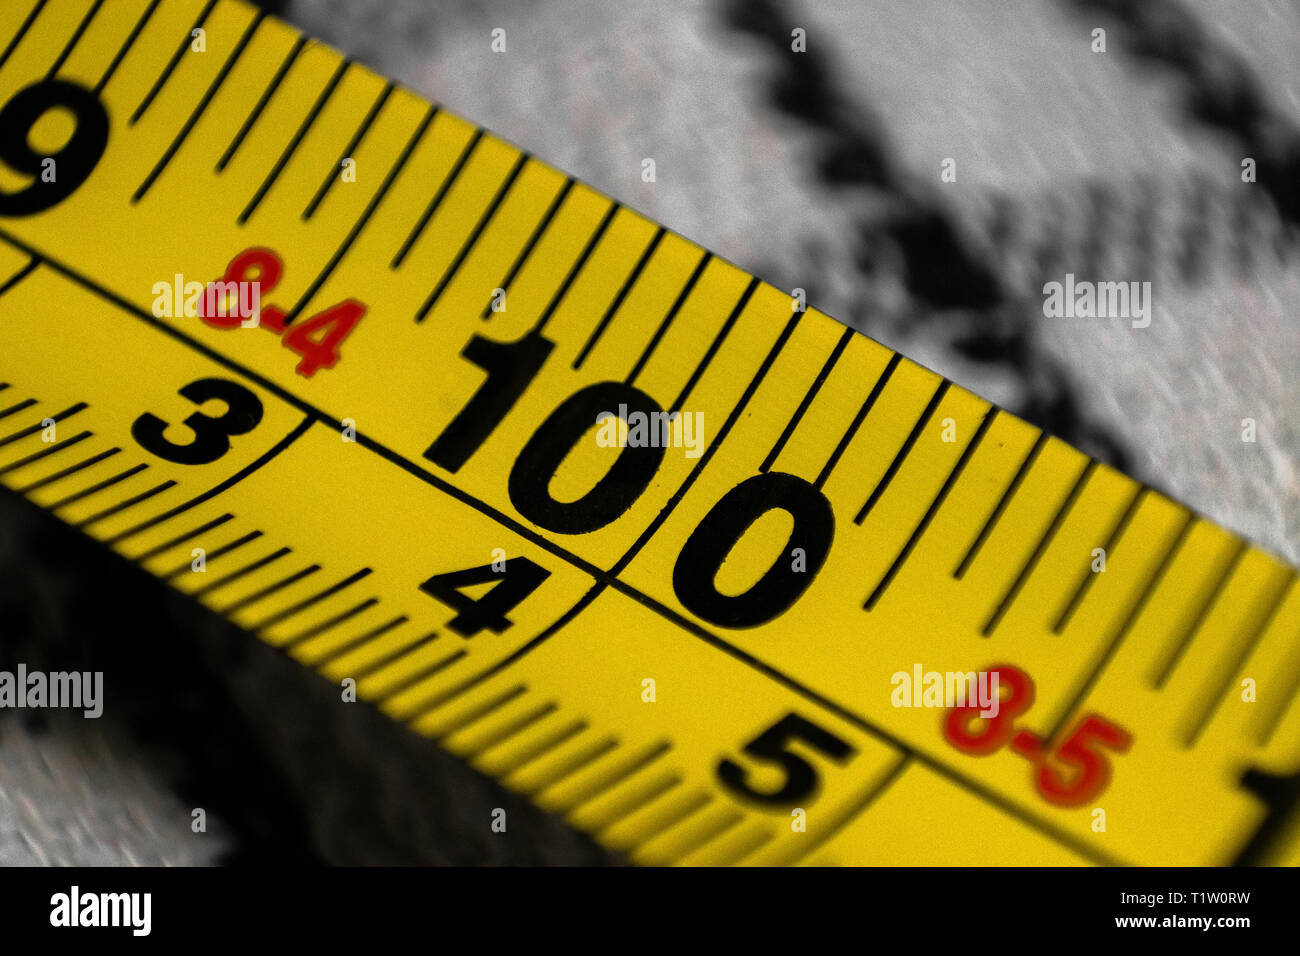 Yellow soft measuring tape Stock Photo by ©YGphoto 241141740